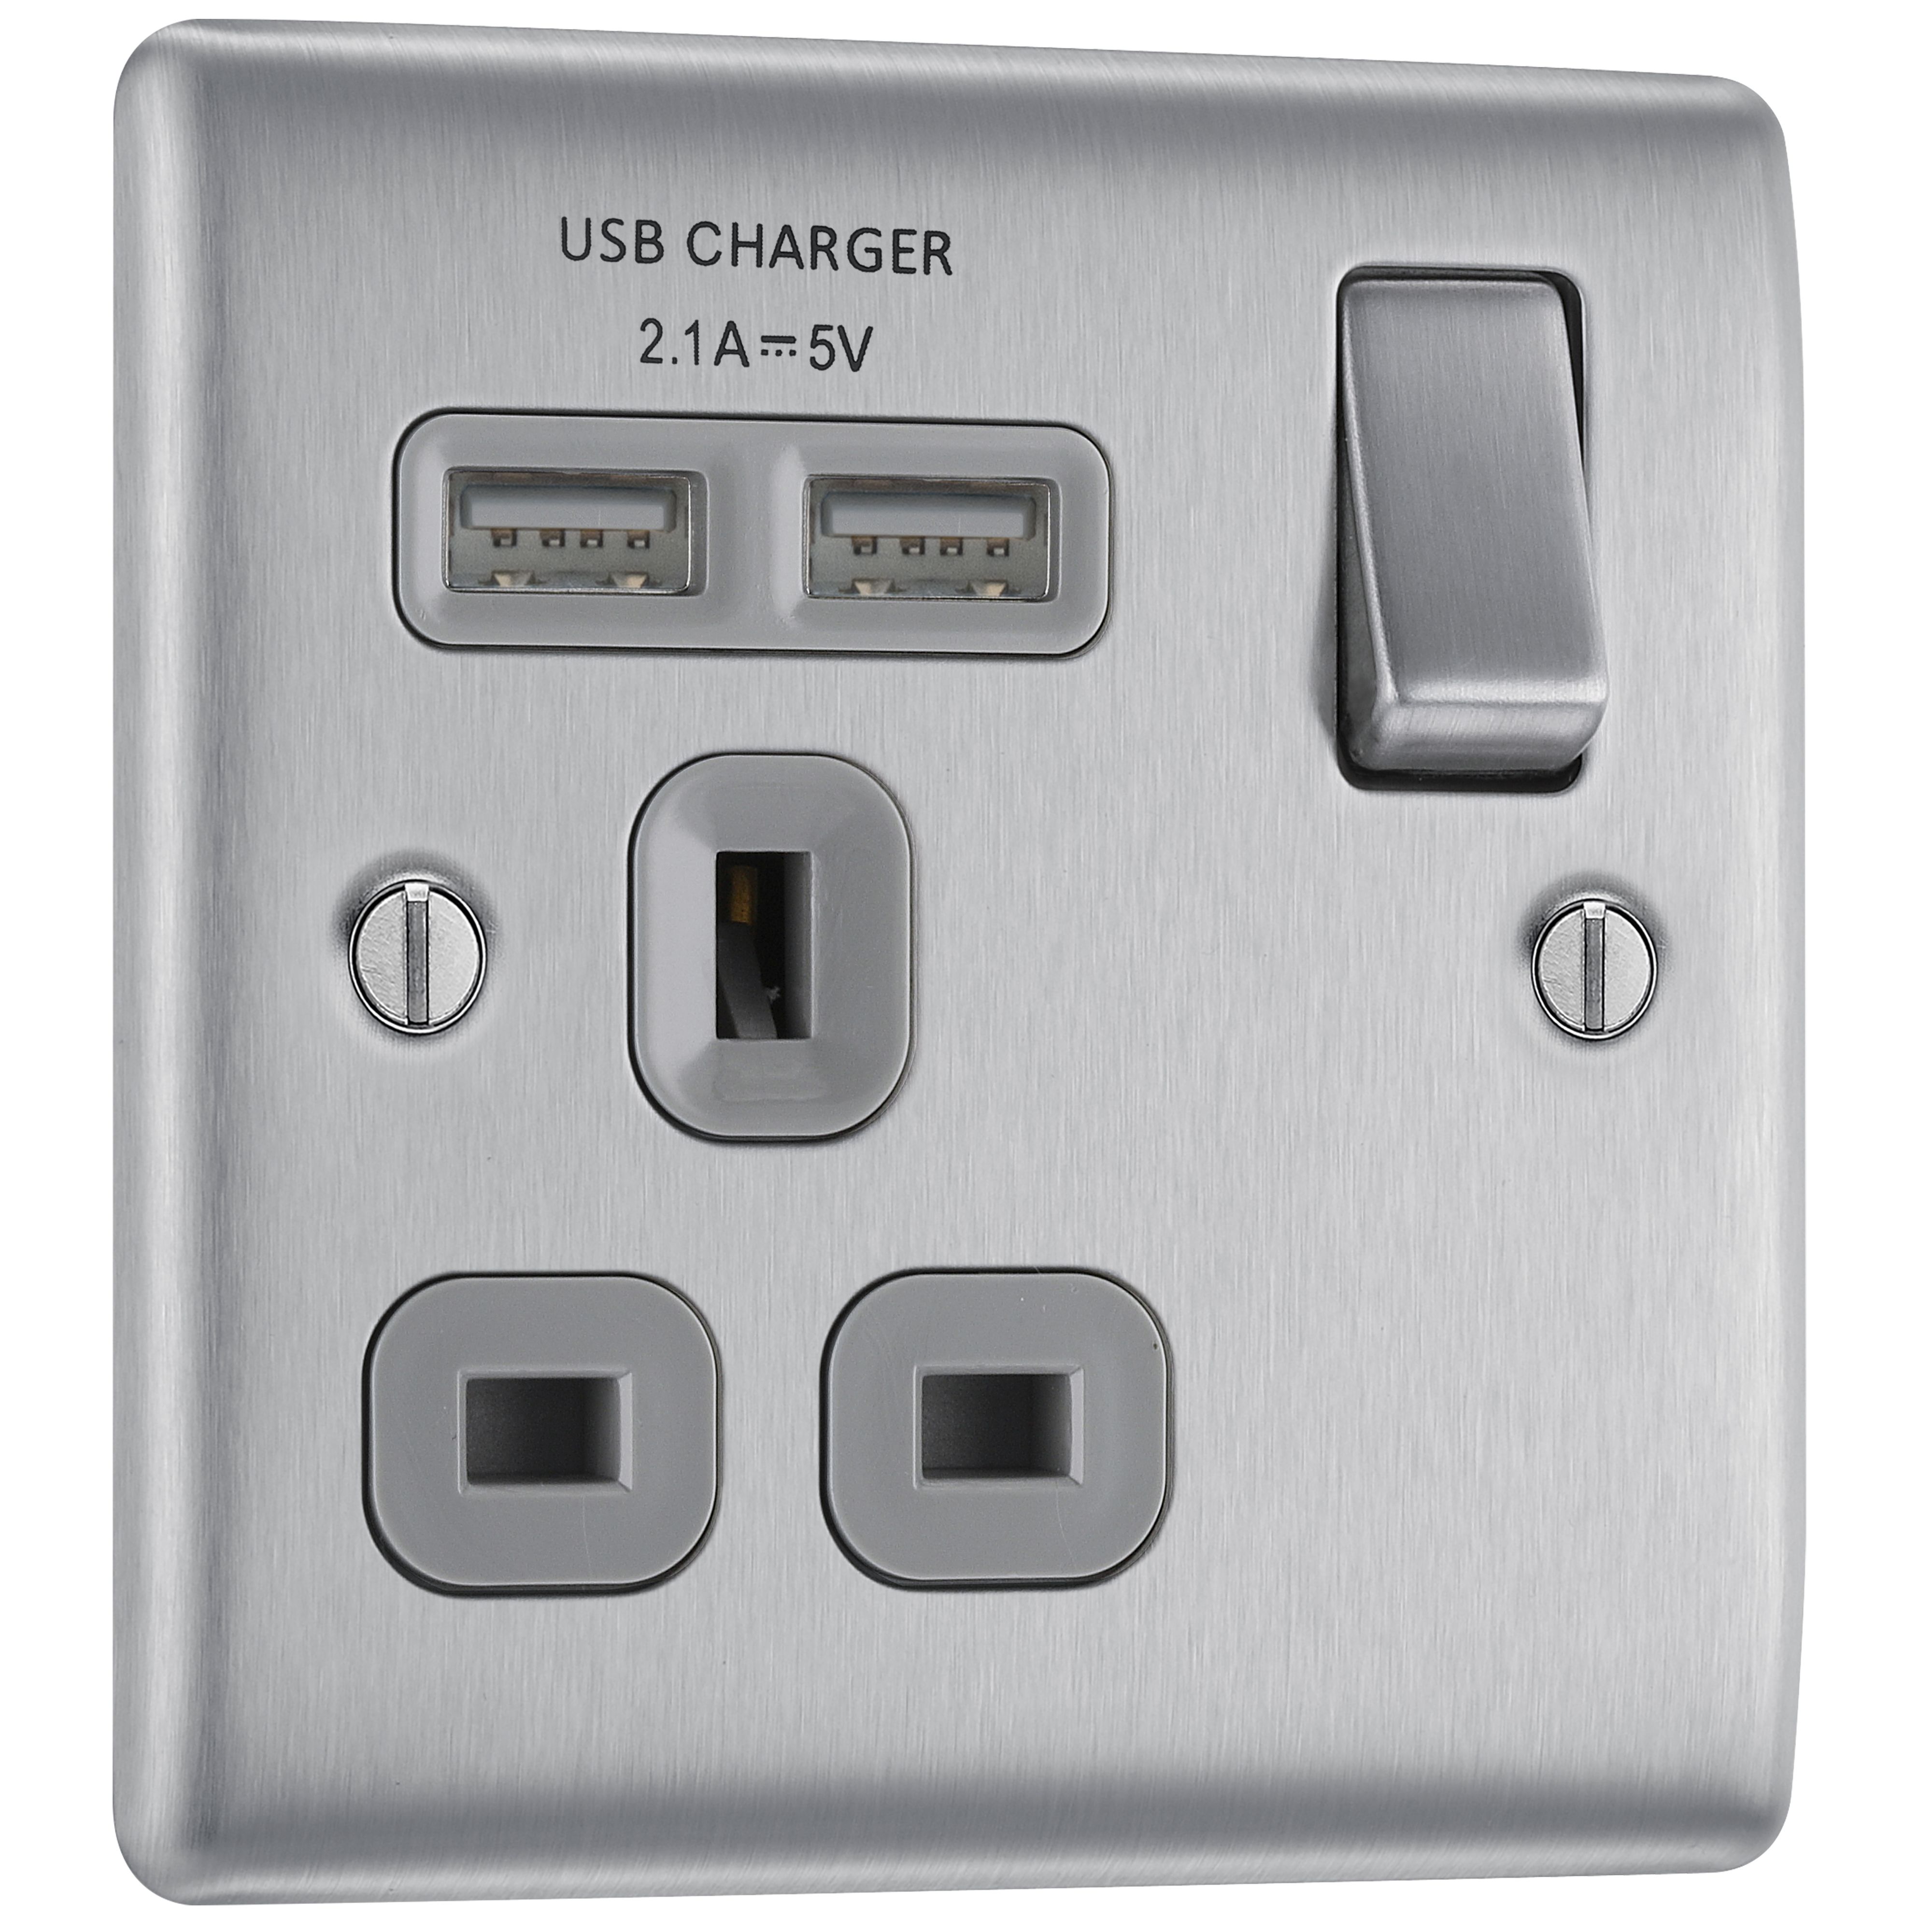 BG Brushed Steel Single 13A Raised slim Switched Socket with USB, x2 & Grey inserts